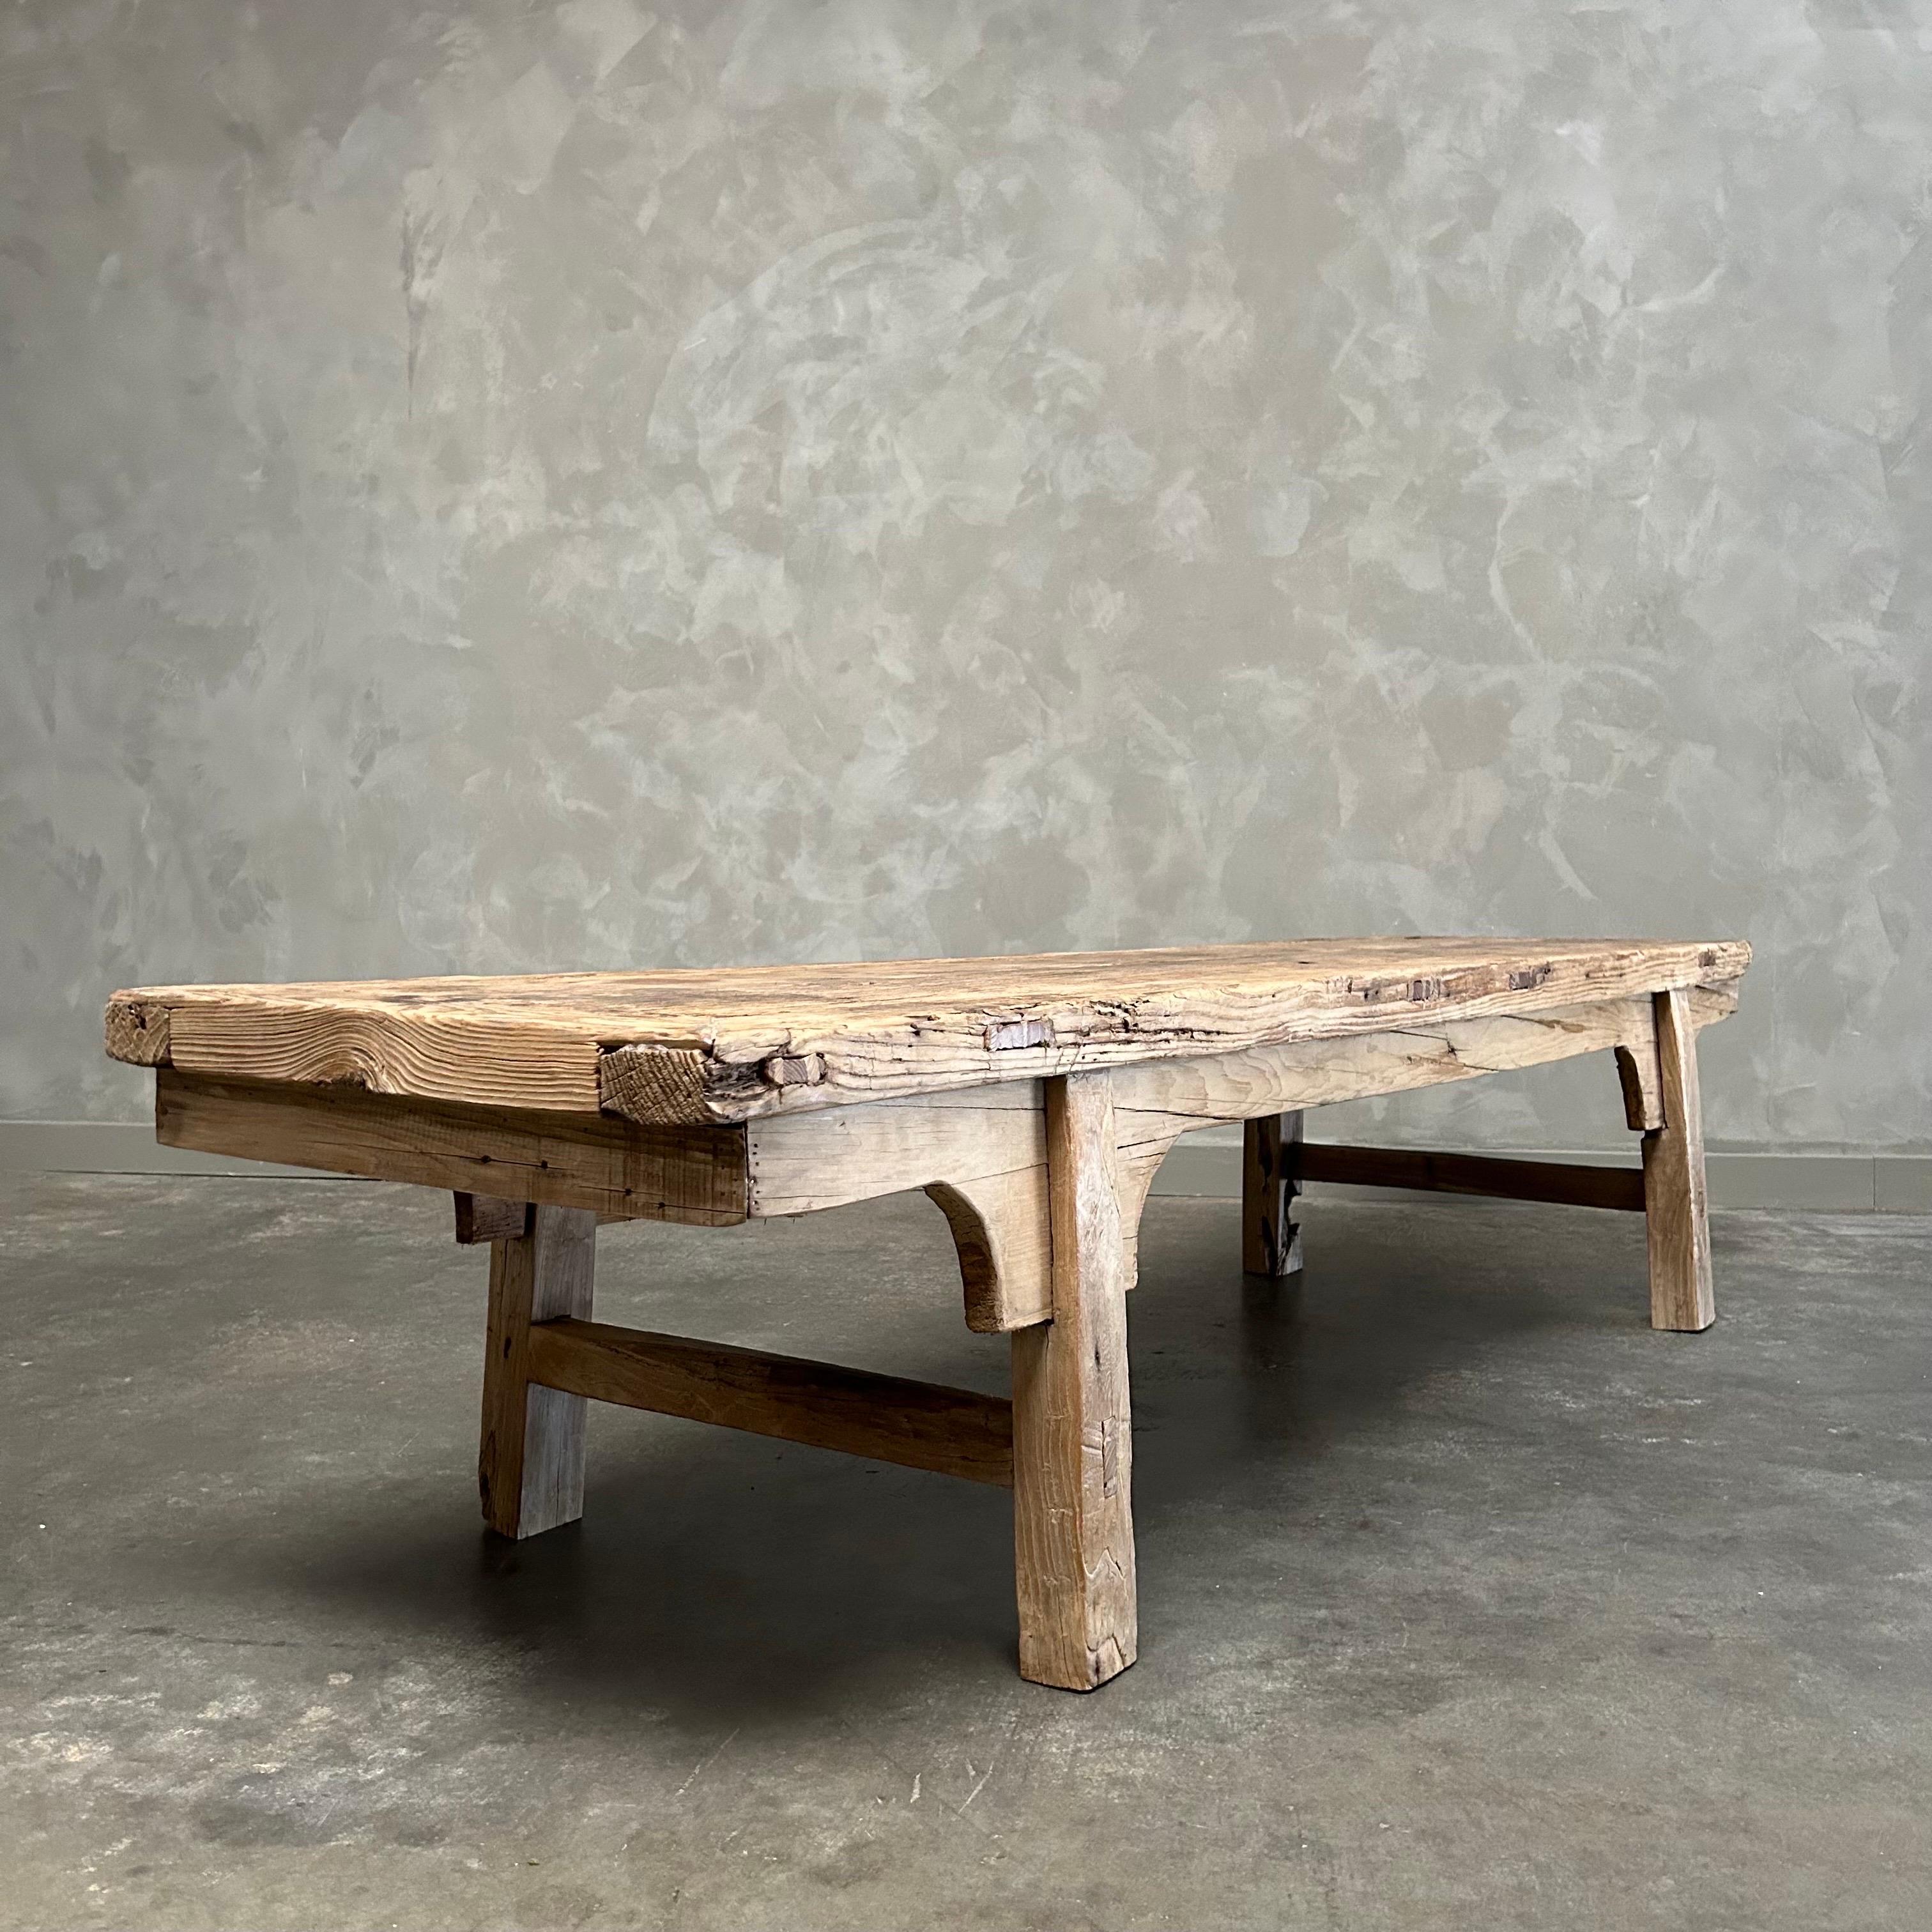 Vintage Elm wood coffee table 
Size: 82”w x 22.5”d x 18”h
Antique patina elm wood coffee table with apron
Natural Raw Elm wood / No finish
Solid and sturdy, ready for everyday use.